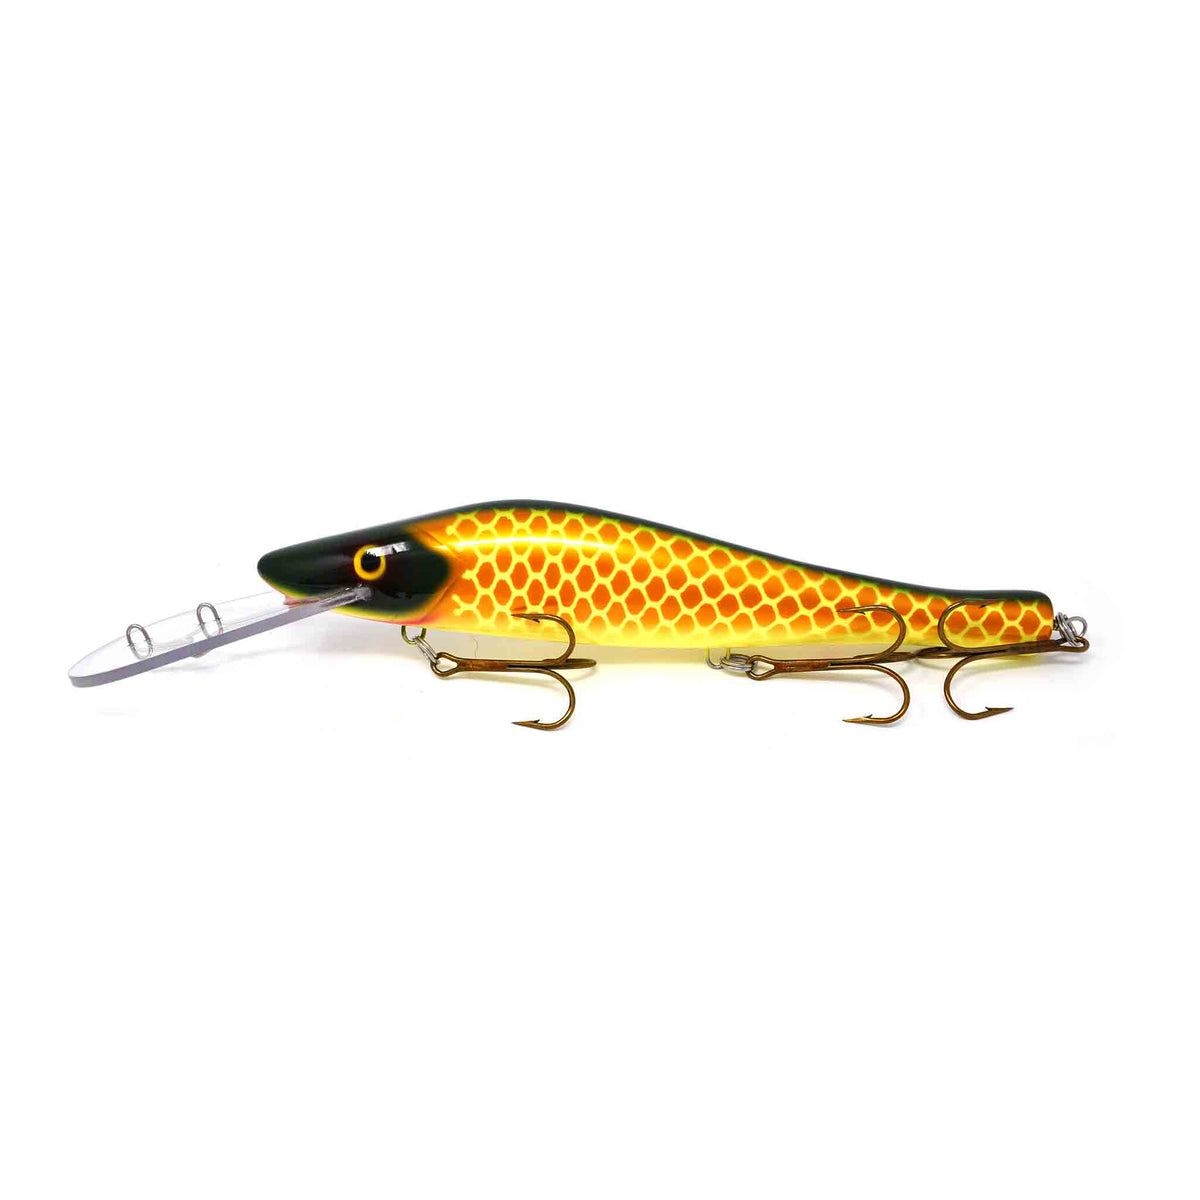 View of Crankbaits Legend lures The Plow Crankbait St. Lawrence available at EZOKO Pike and Musky Shop